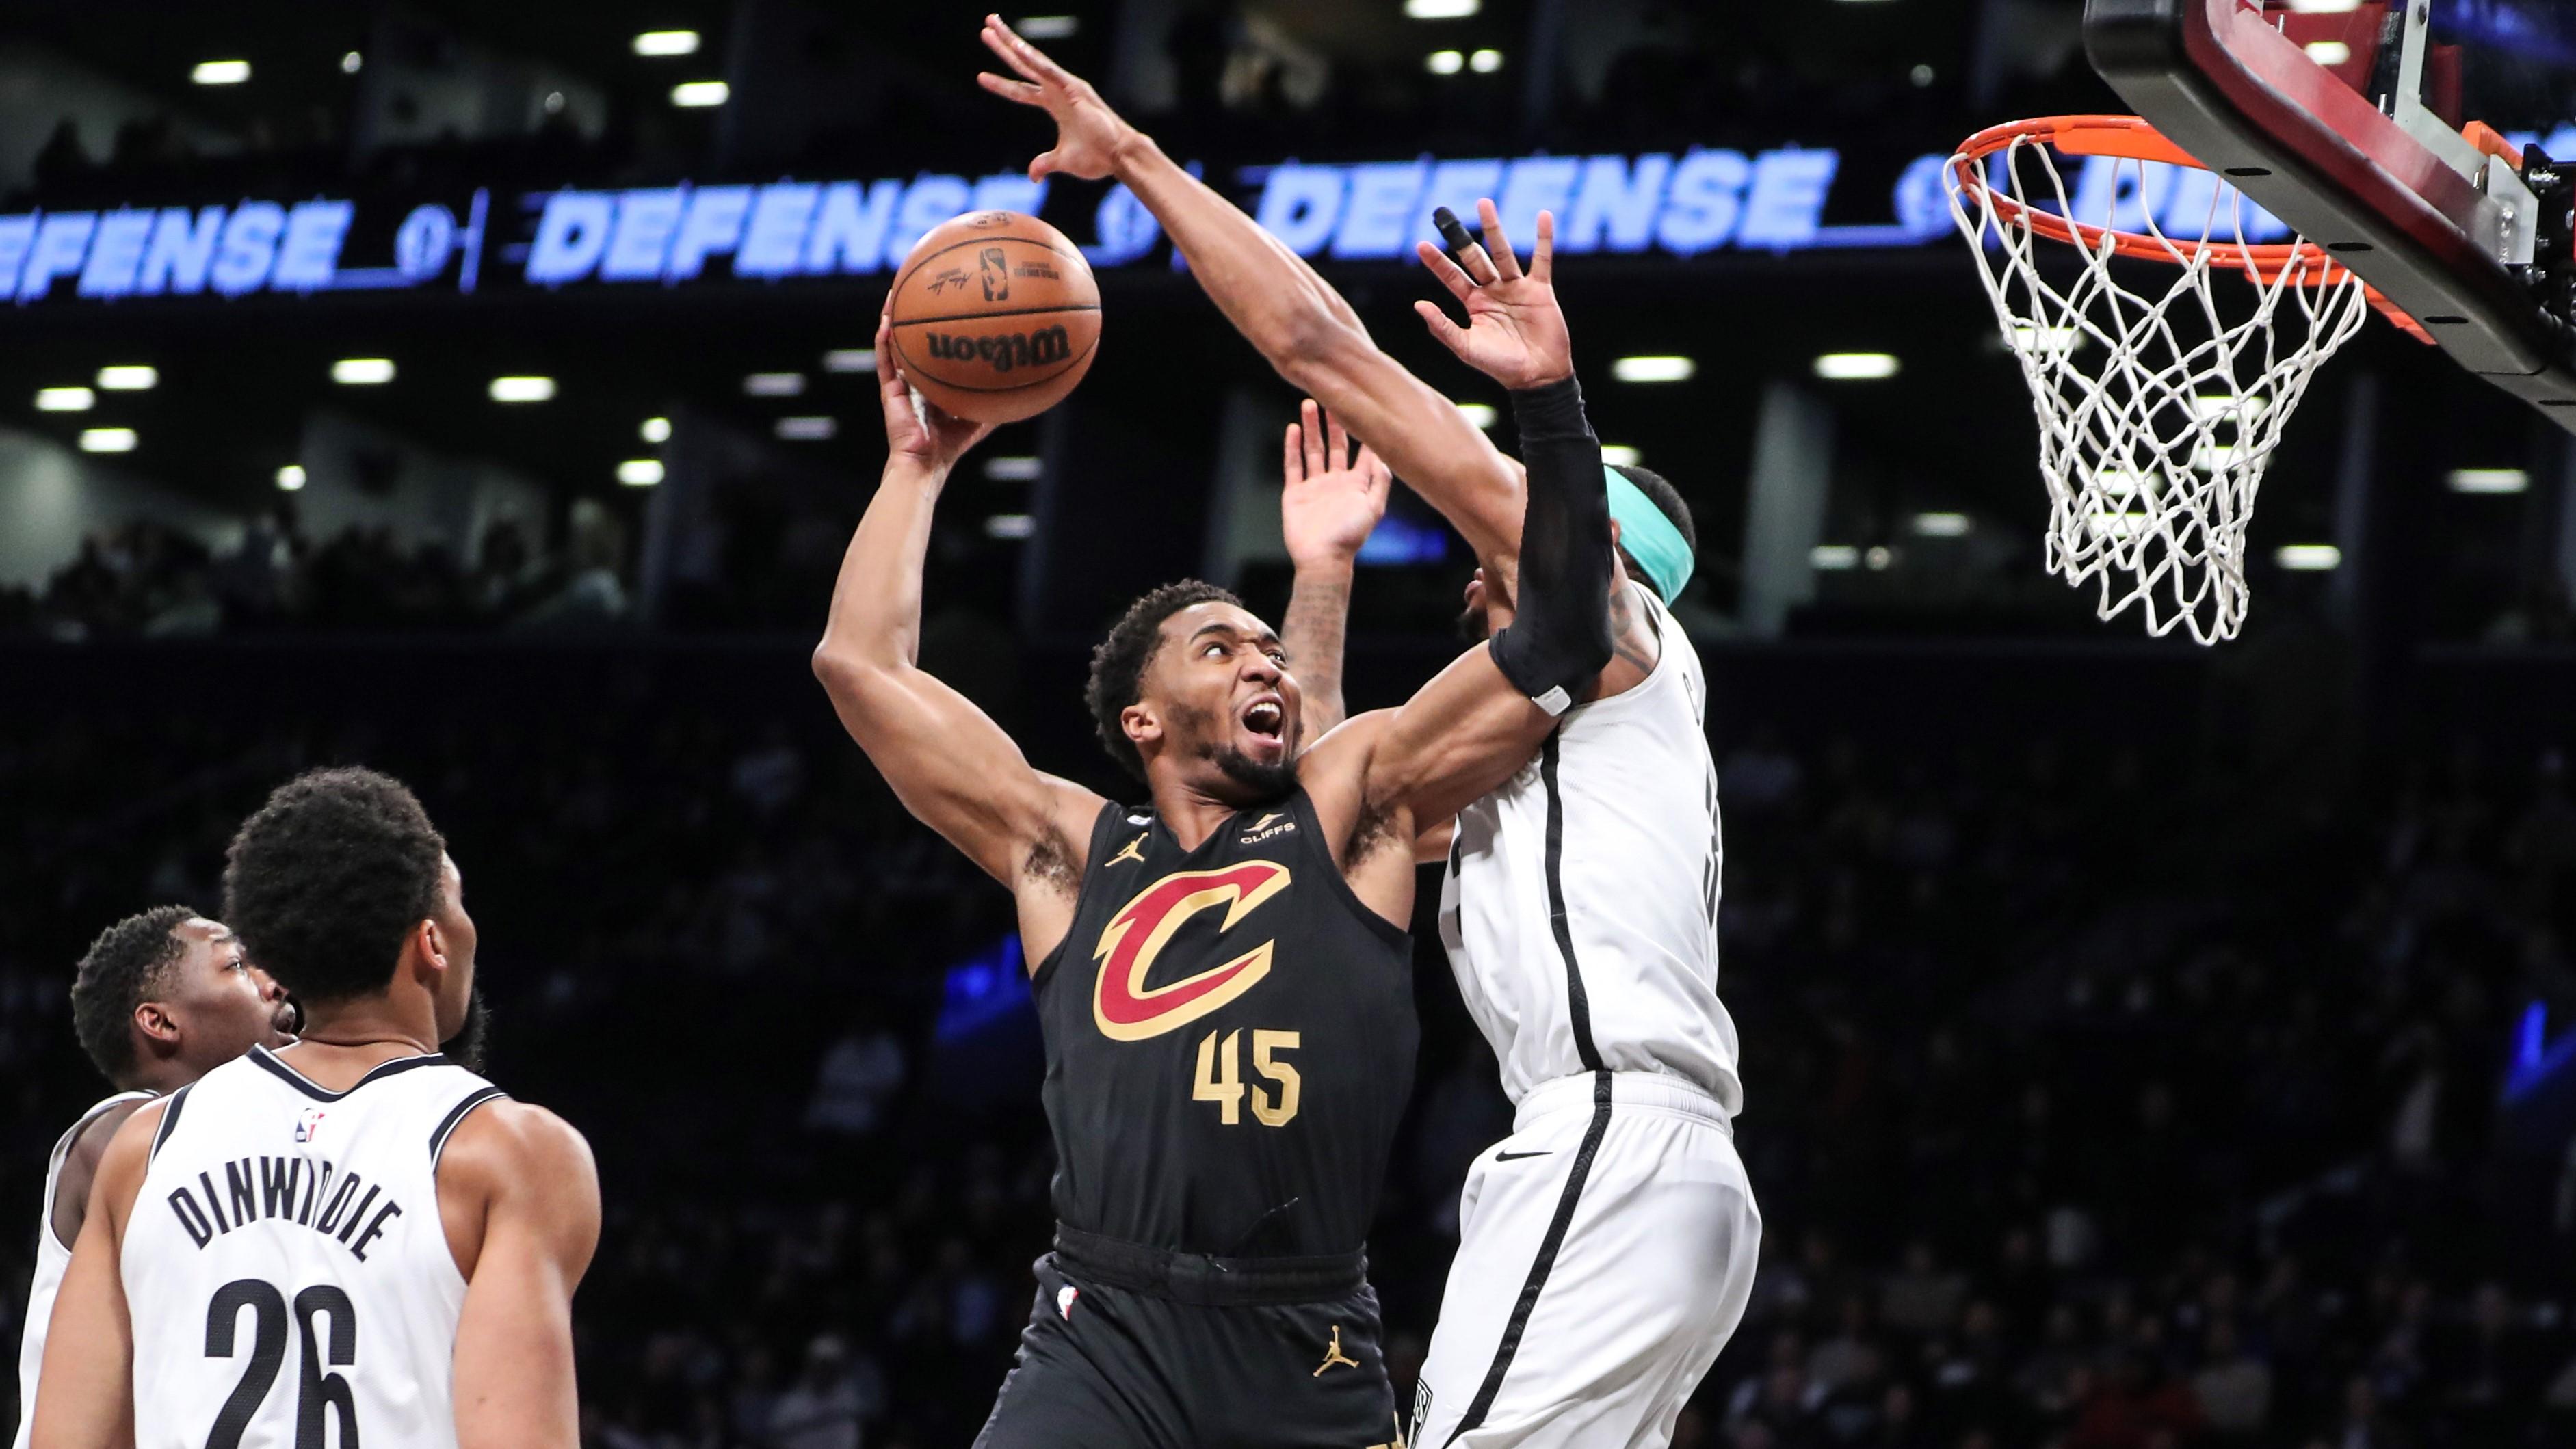 Mar 23, 2023; Brooklyn, New York, USA; Cleveland Cavaliers guard Donovan Mitchell (45) goes up against Brooklyn Nets center Nic Claxton (33) in the first quarter at Barclays Center. Mandatory Credit: Wendell Cruz-USA TODAY Sports / © Wendell Cruz-USA TODAY Sports